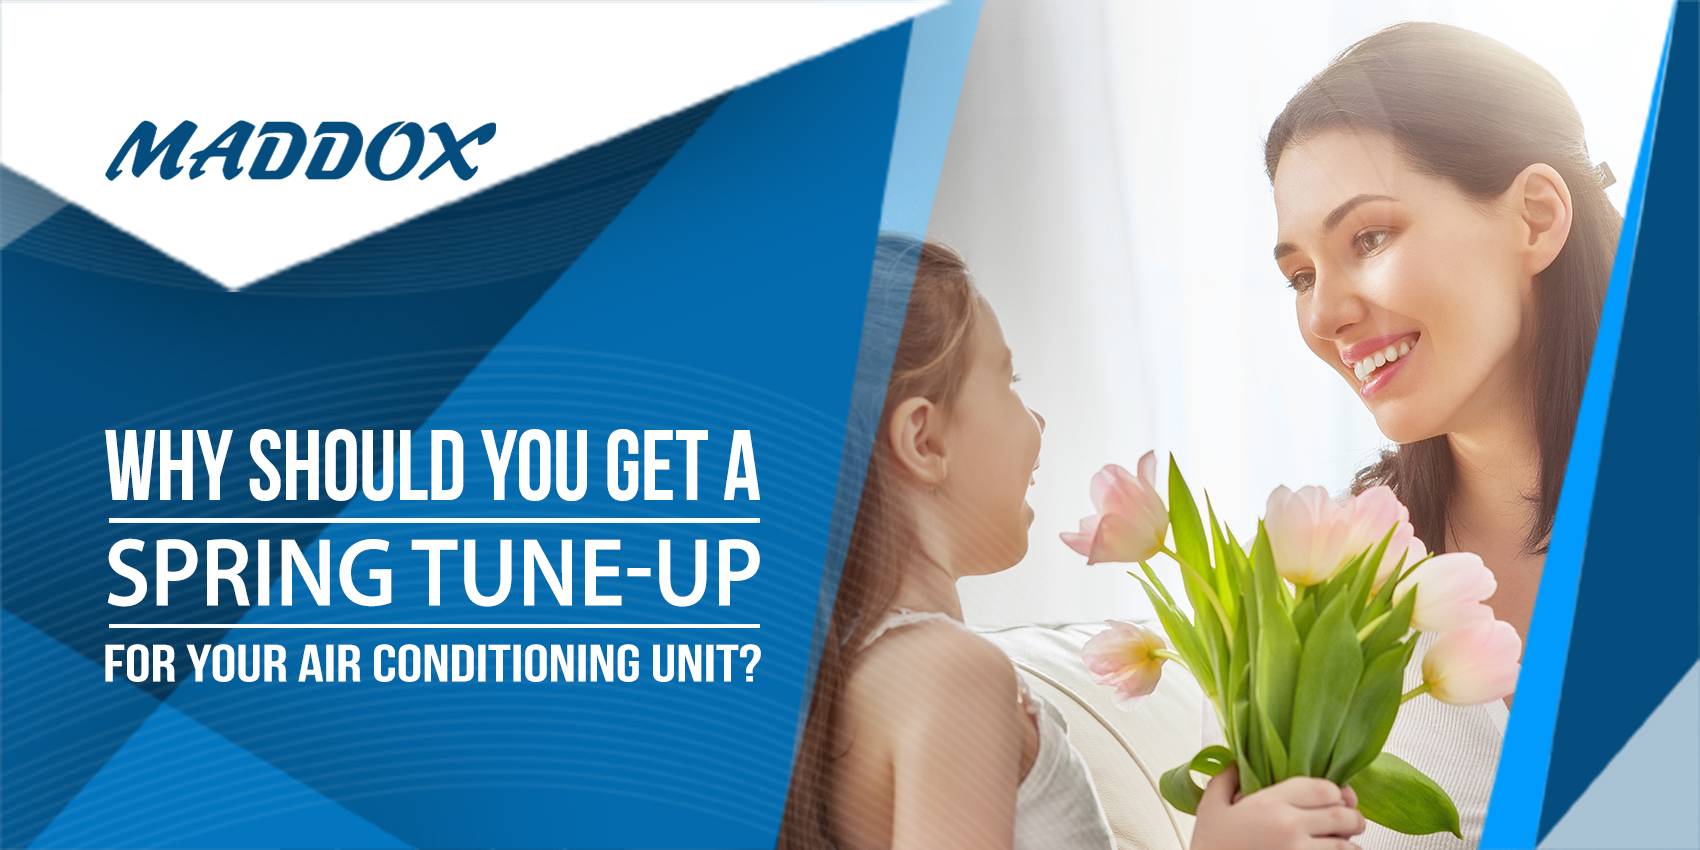 Why Should You Get A Spring Tune-Up for your Air Conditioning Unit?